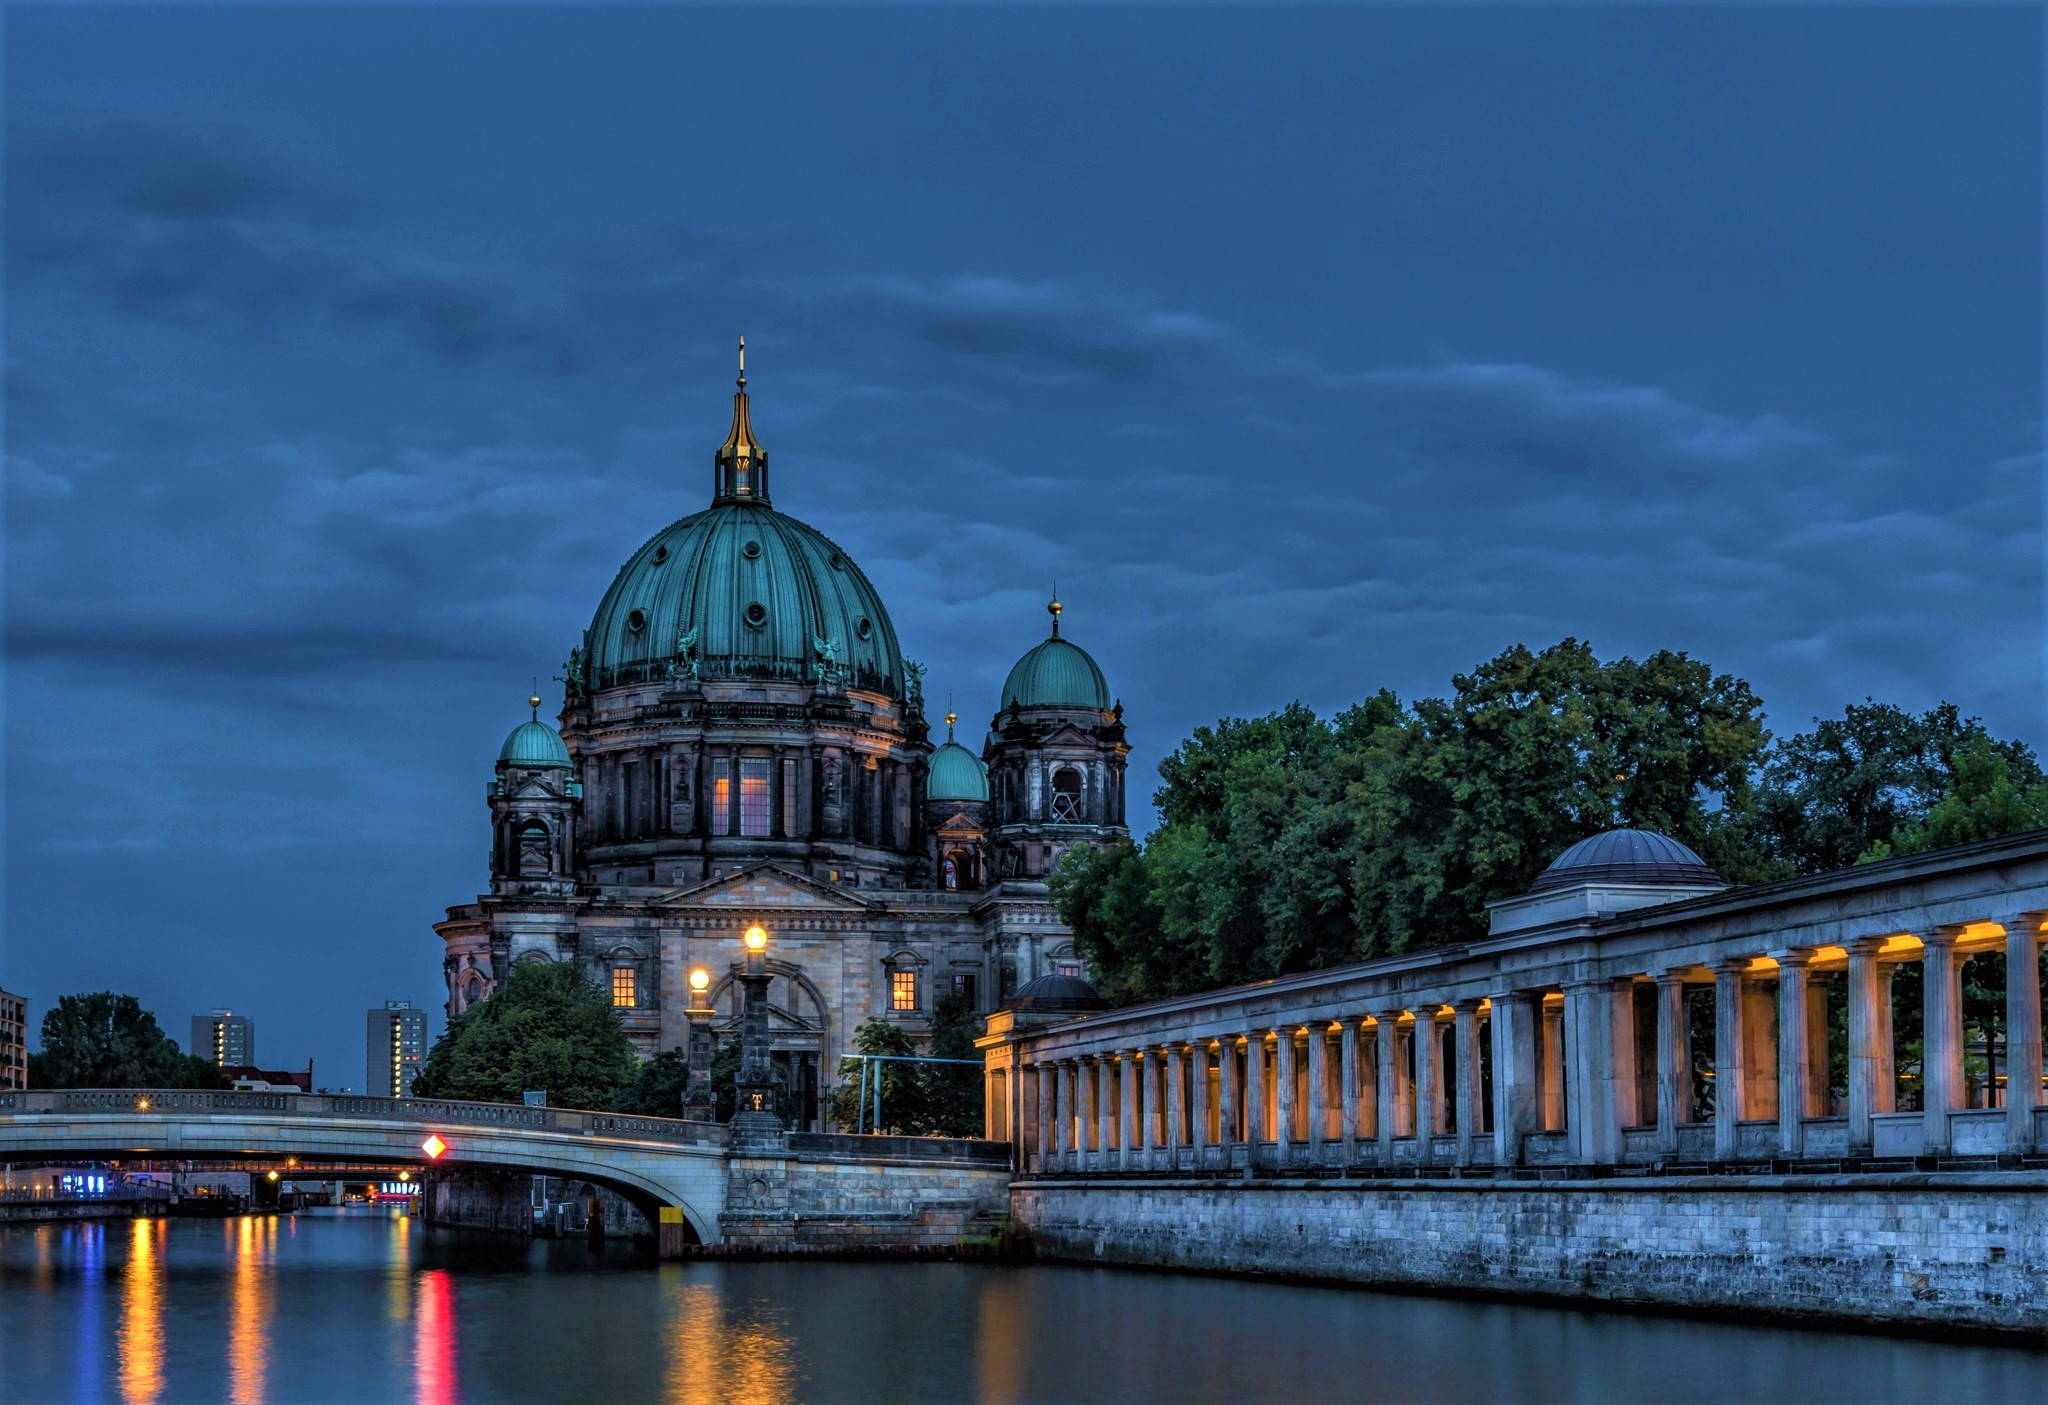 berlin, religious, berlin cathedral, bridge, city, dome, dusk, night, river, twilight, cathedrals